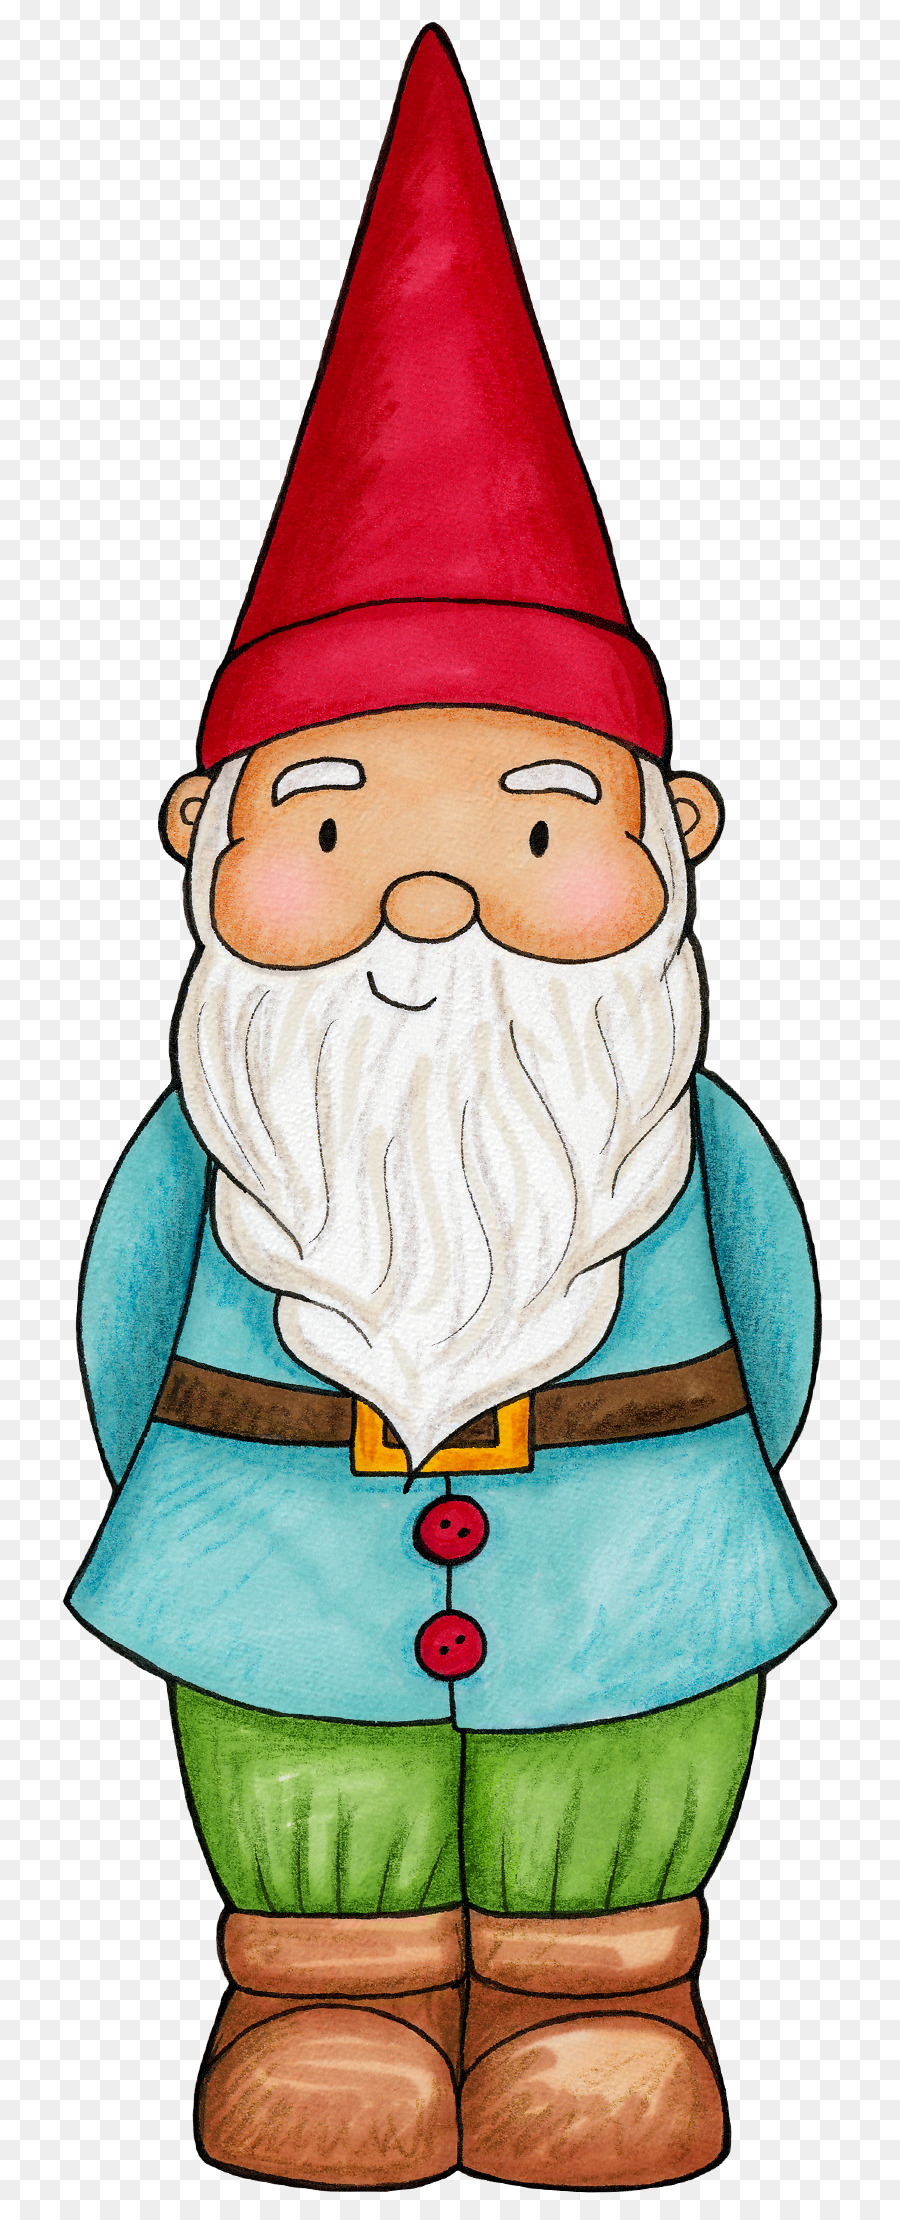 Garden gnome Clip art - Gnome png download - 792*2215 - Free Transparent Gnome png Download.